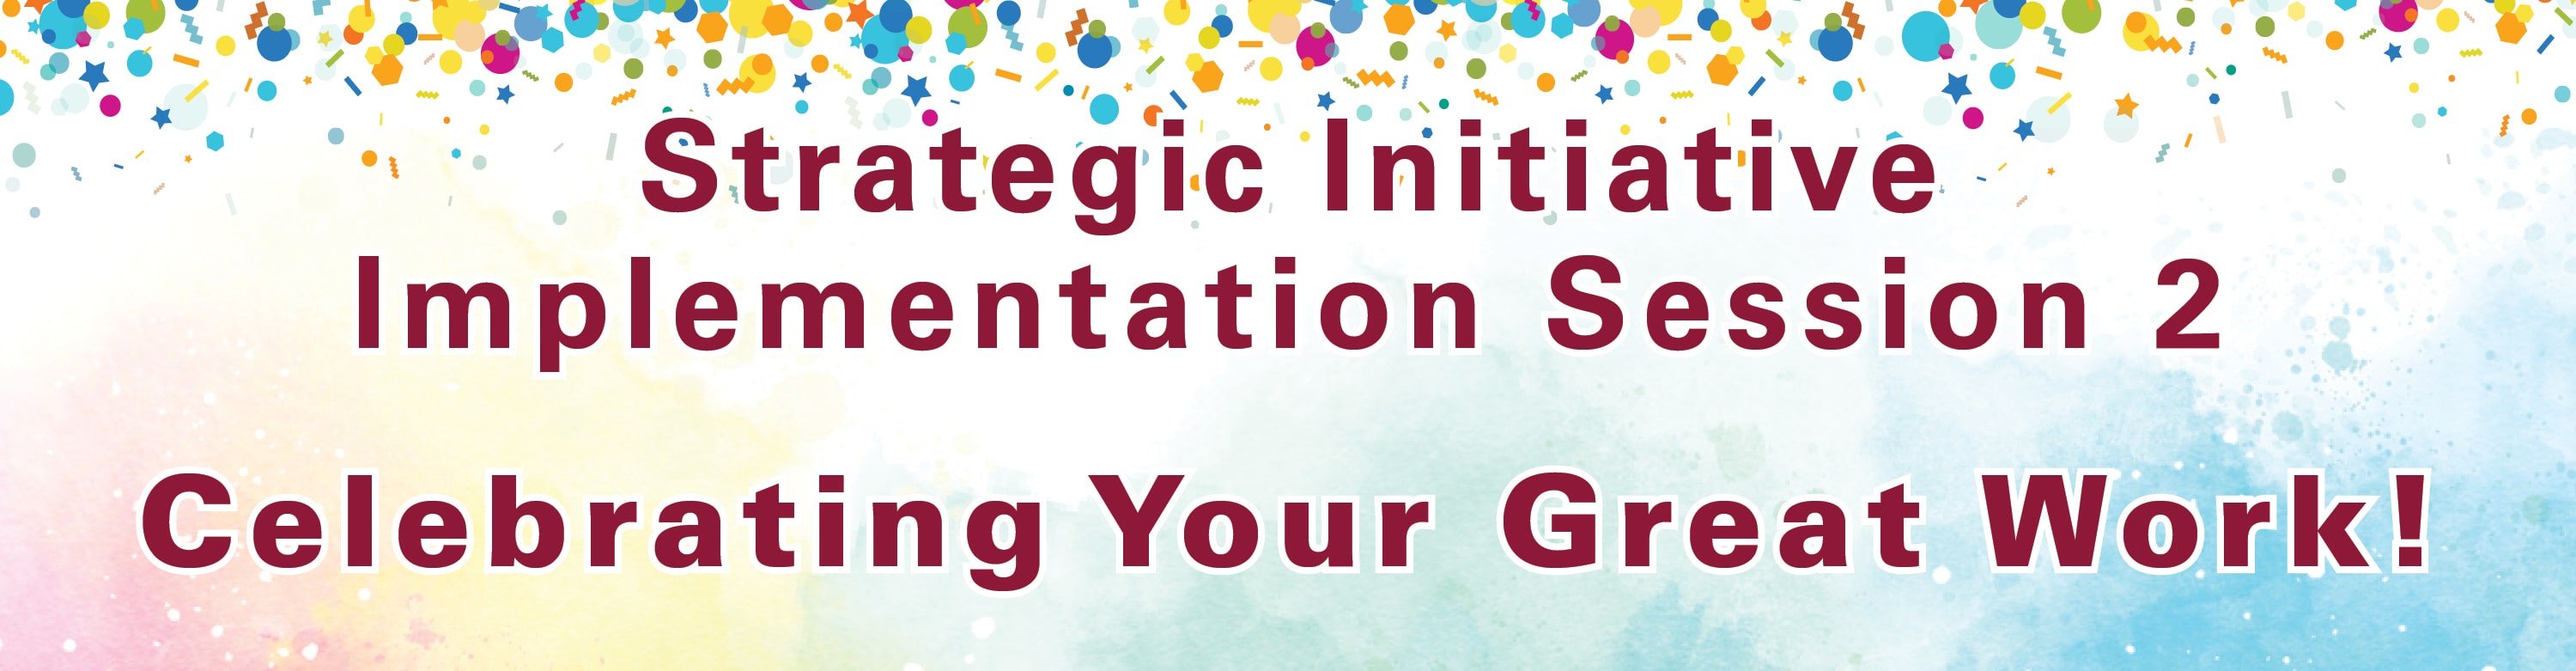 Strategic Initiative Implementation Session 2: Celebrating your Great Work!